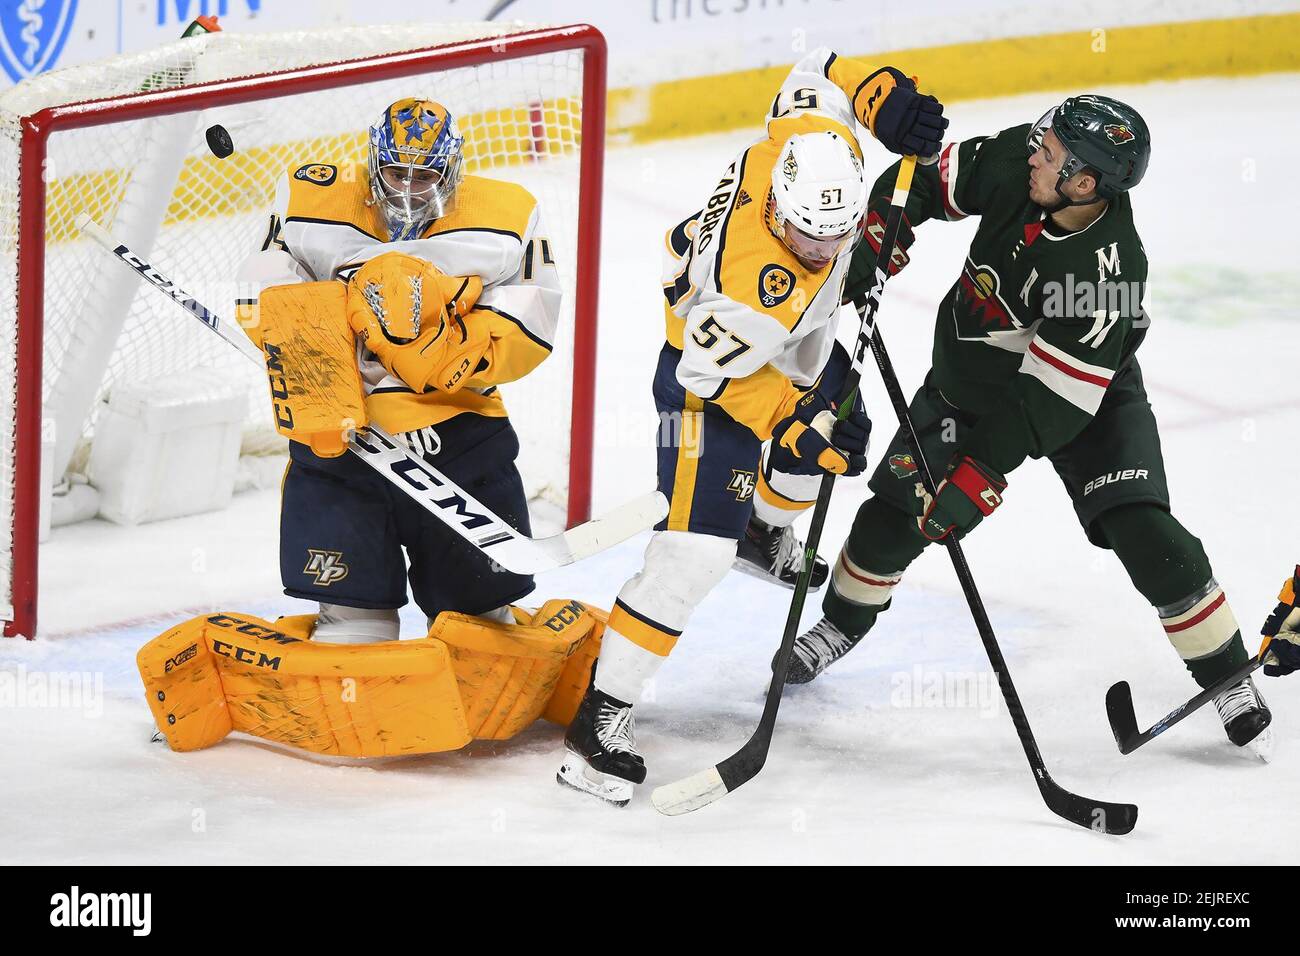 Nashville Predators goaltender Juuse Saros (74) turns away a shot as the Minnesota Wild's Zach Parise (11) vies for position with defenseman Dante Fabbro (57) in the first period on Tuesday, March 3, 2020 at the Xcel Energy Center in St. Paul, MInn. The Wild won, 3-1. (Aaron Lavinsky/Minneapolis Star Tribune/TNS) Stock Photo